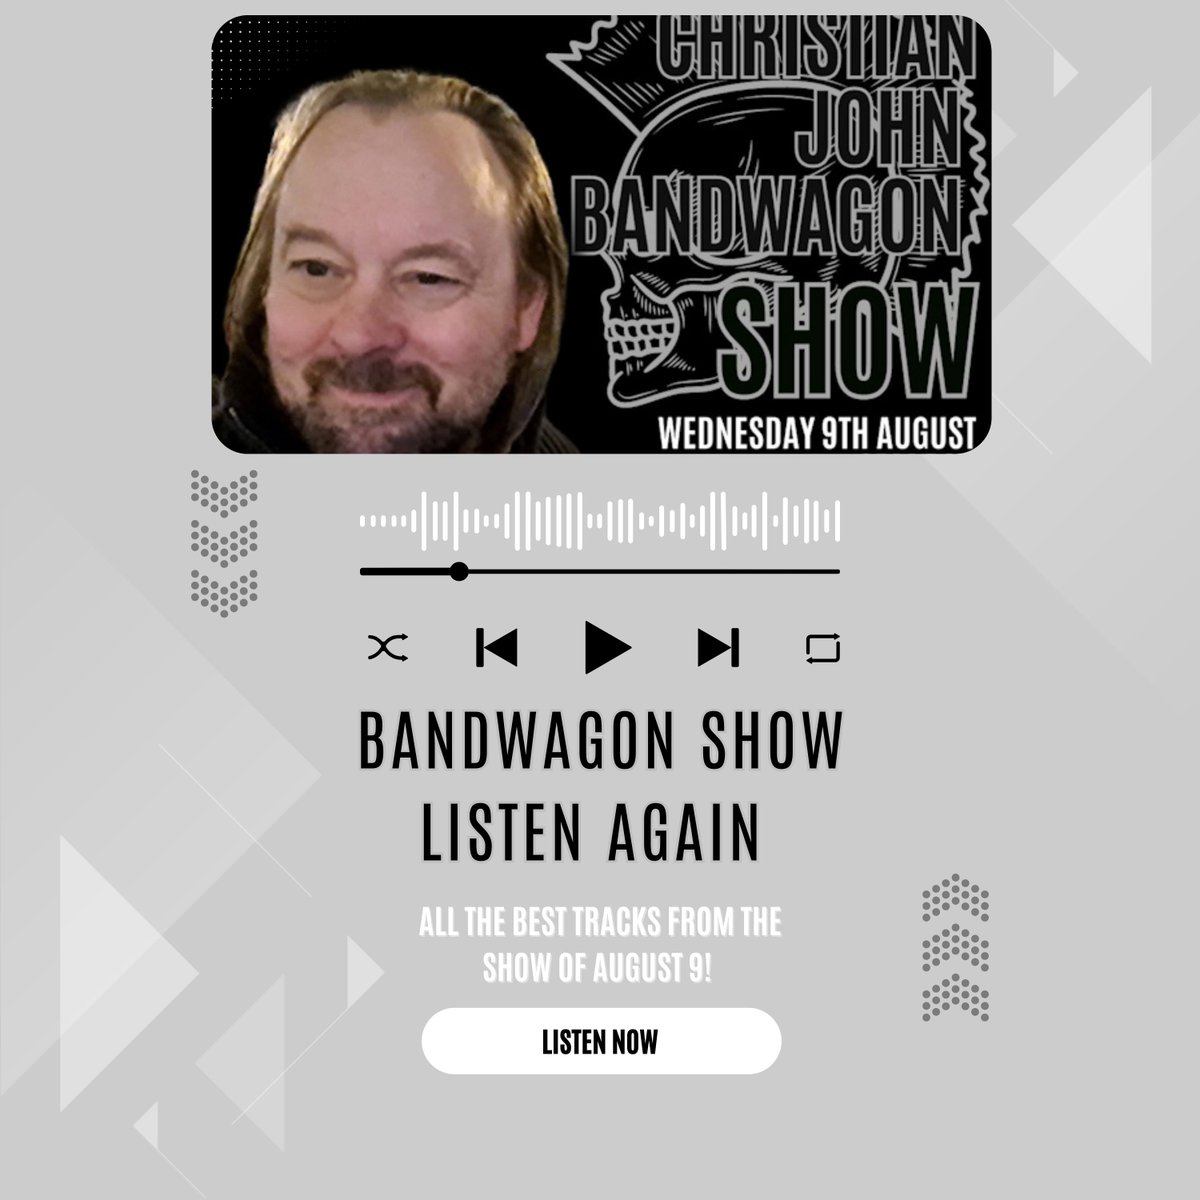 Listen Again to BANDwagon of 9 August mixcloud.com/Seedsroy/bandw… or here for all: radiowigwam.co.uk/listenagain ft: @SunridersThe83 @callebaut_14686 @thenearlydeads @amoniacobanda @ANIN_official @The_Future_Us @kellebosi @themallees